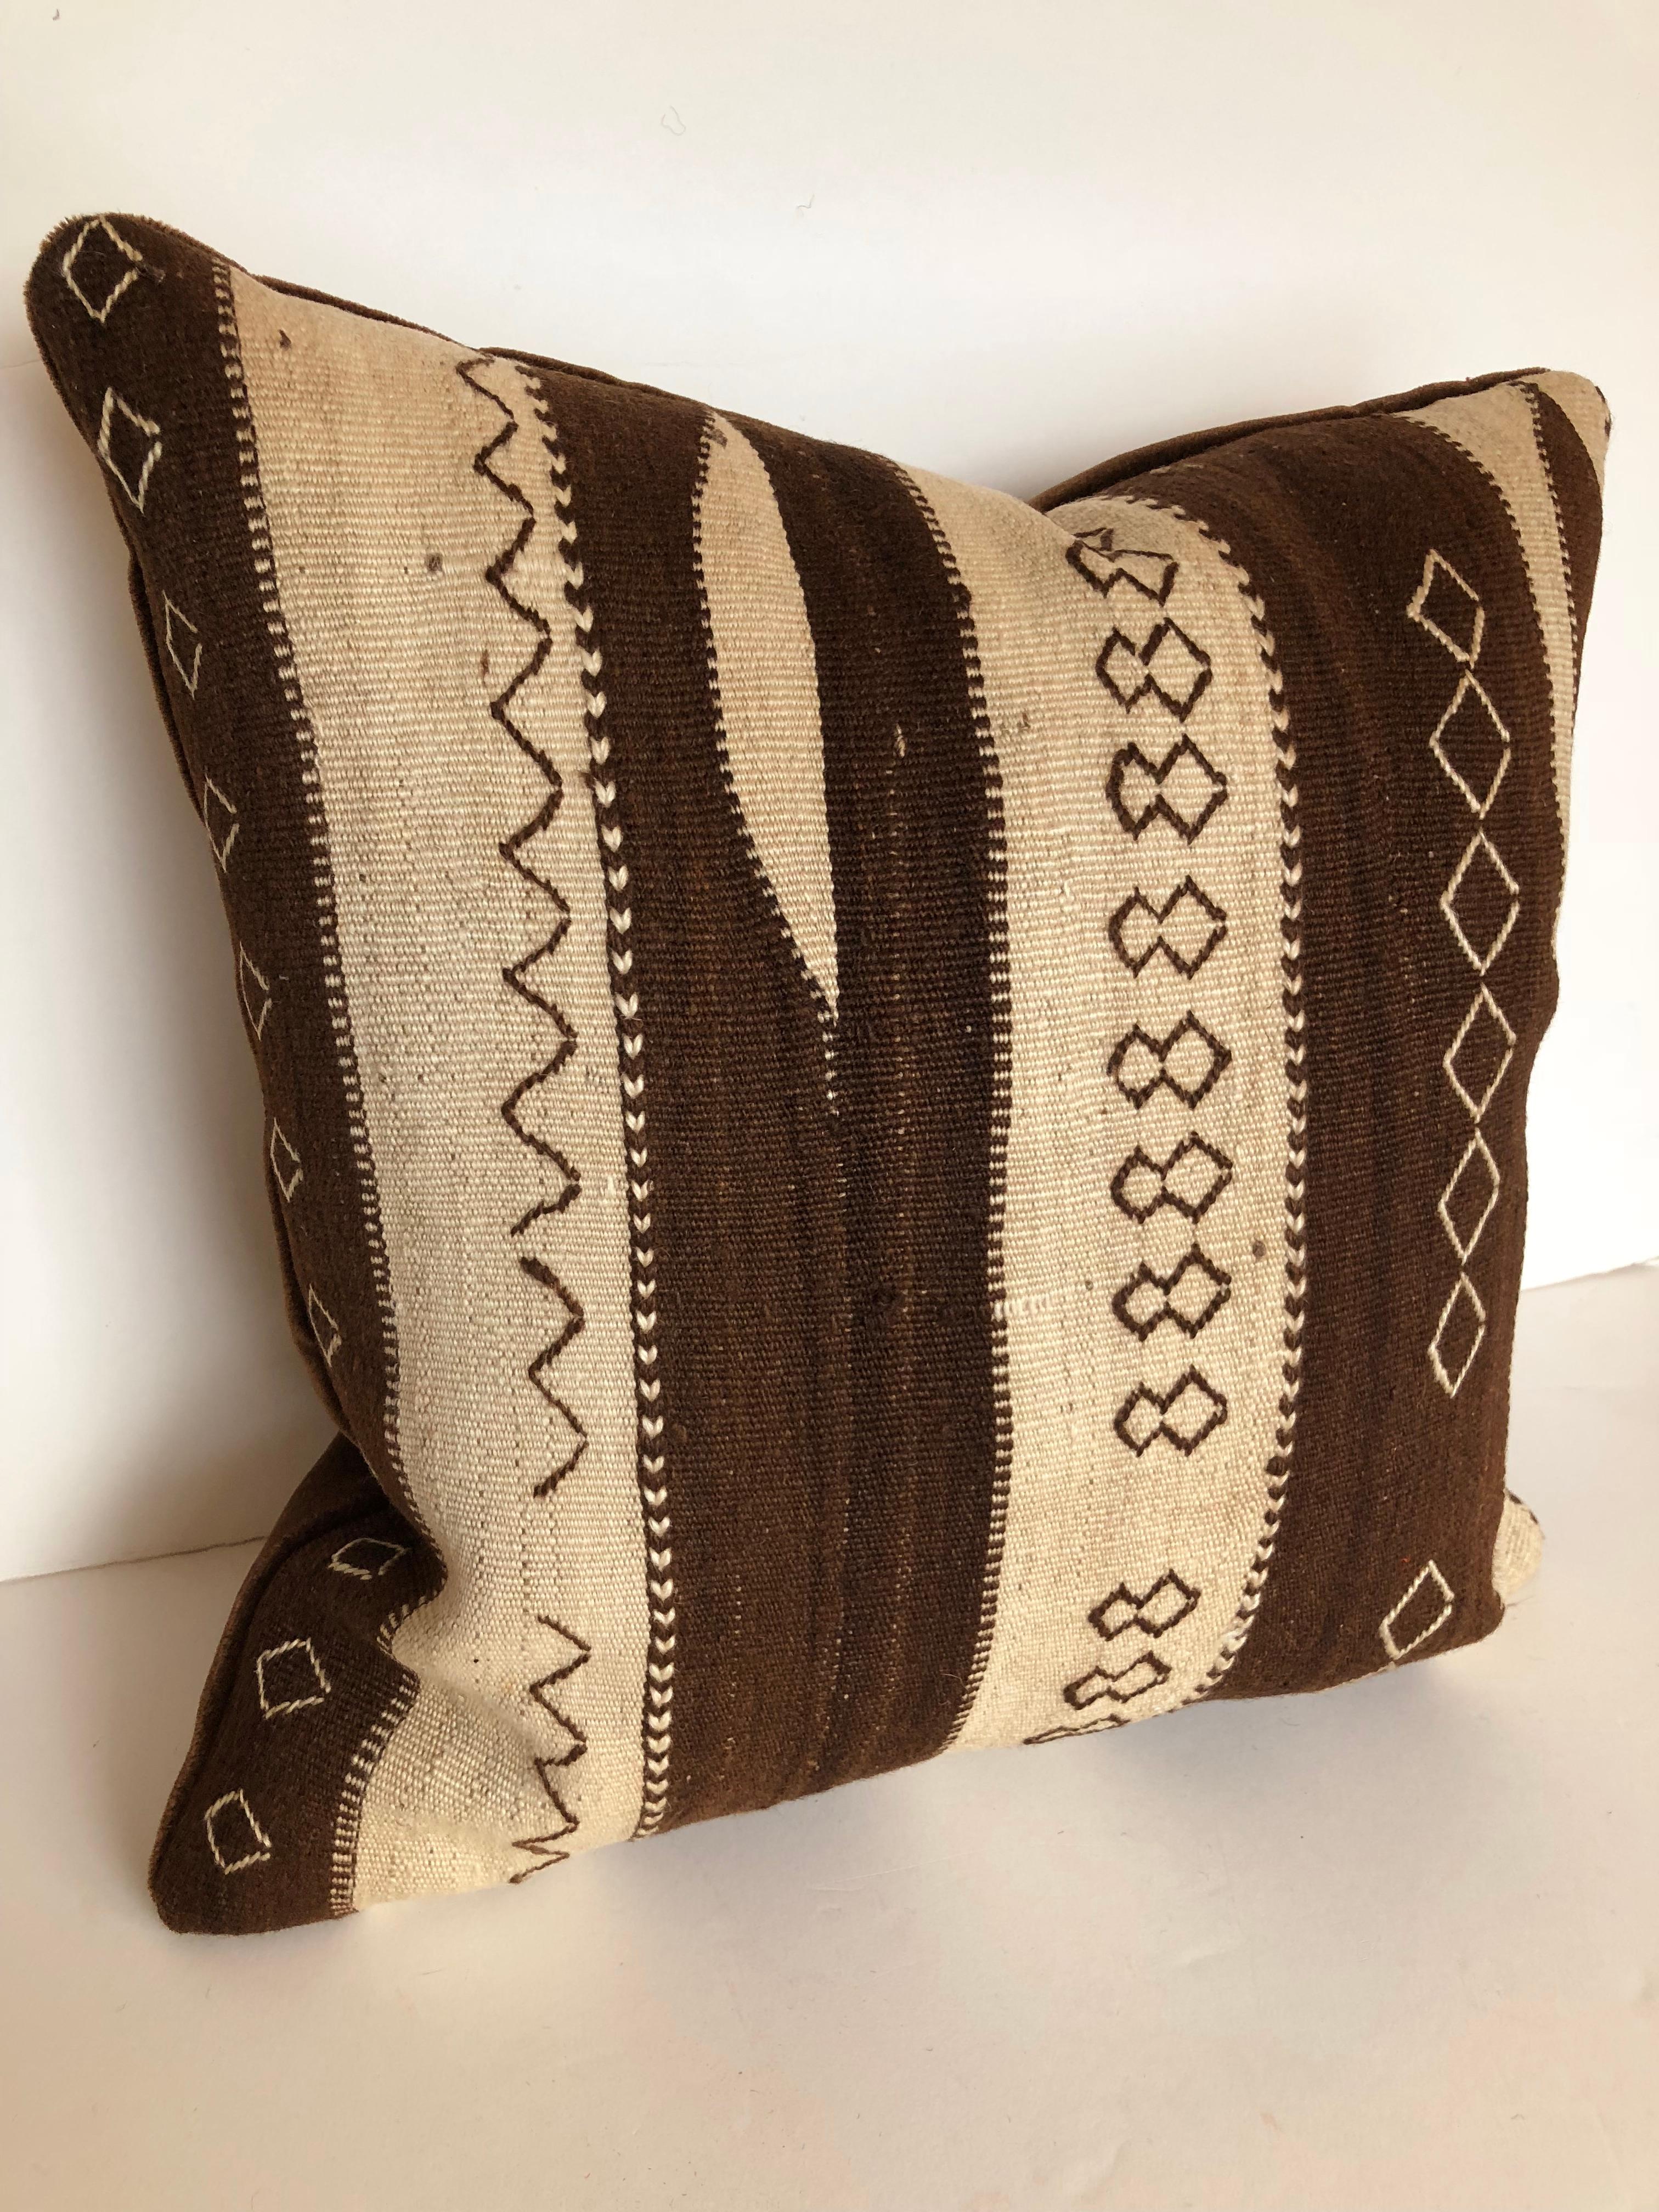 Custom pillow cut from a vintage hand-loomed wool Moroccan rug from the Ourika Valley in the high Atlas Mountains. Wool is soft with all natural color and embroidered tribal designs.
Pillows are backed in dark brown mohair, filled with an insert of